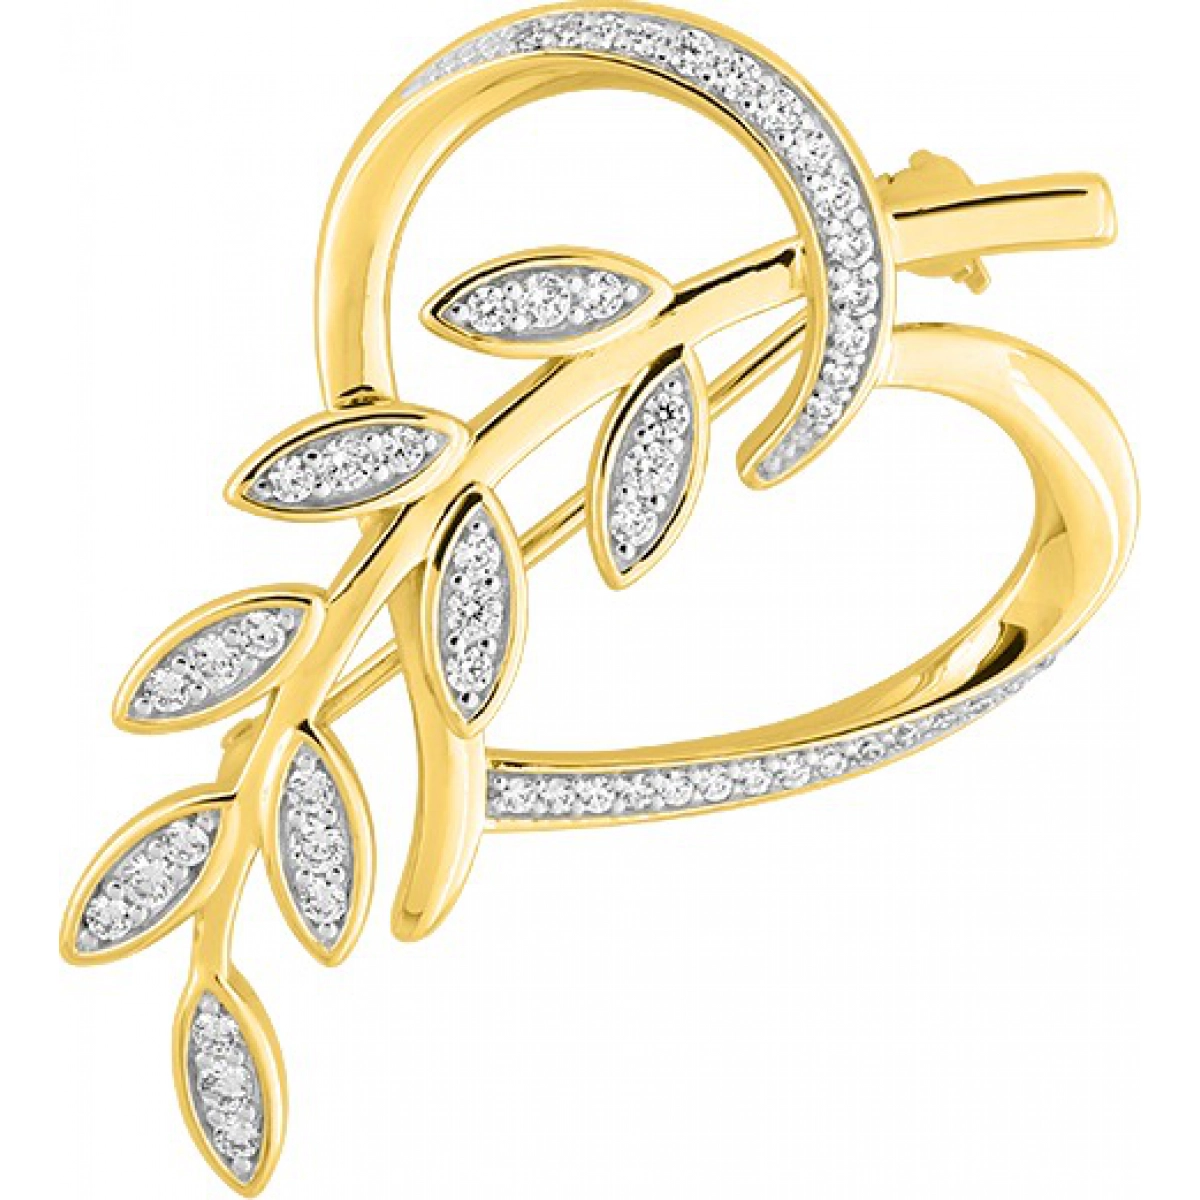 Ring cz and rhod gold plated Brass Lua Blanca  221490.9 